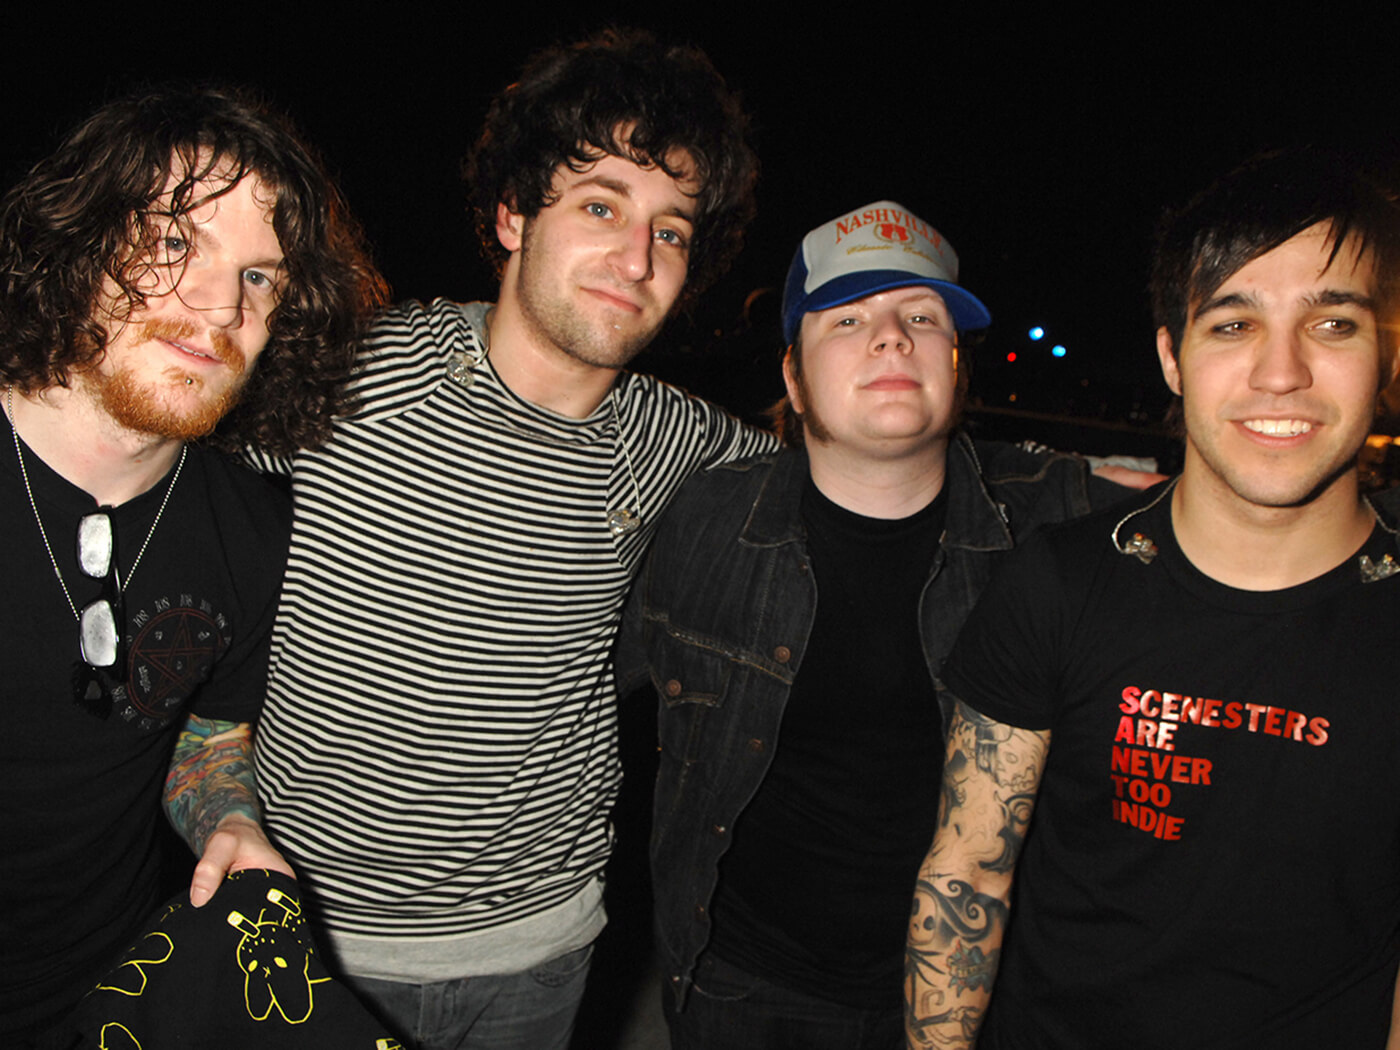 Fall Out Boy during “MTV’s Infinity Flight 206 With Fall Out Boy” in 2007, by Jeff Kravitz/Film Magic, Inc via Getty Images